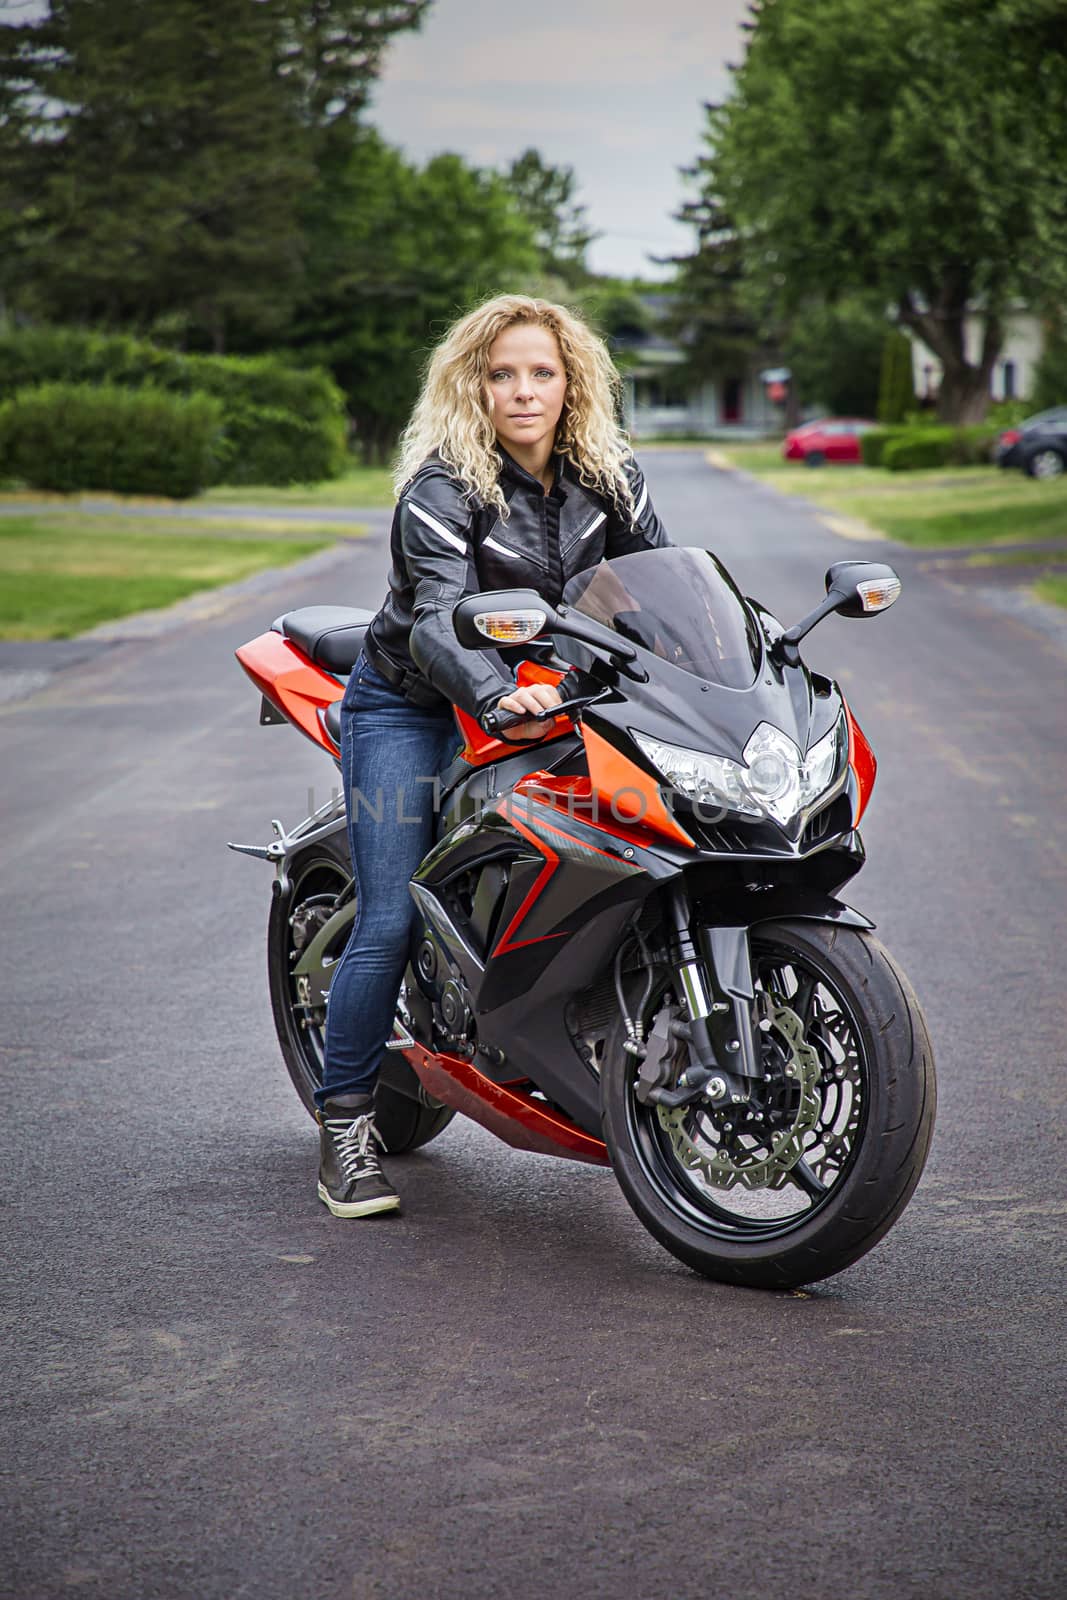 twenty something curly blond woman, sitting on a sport motocycle, in the middle of the road
